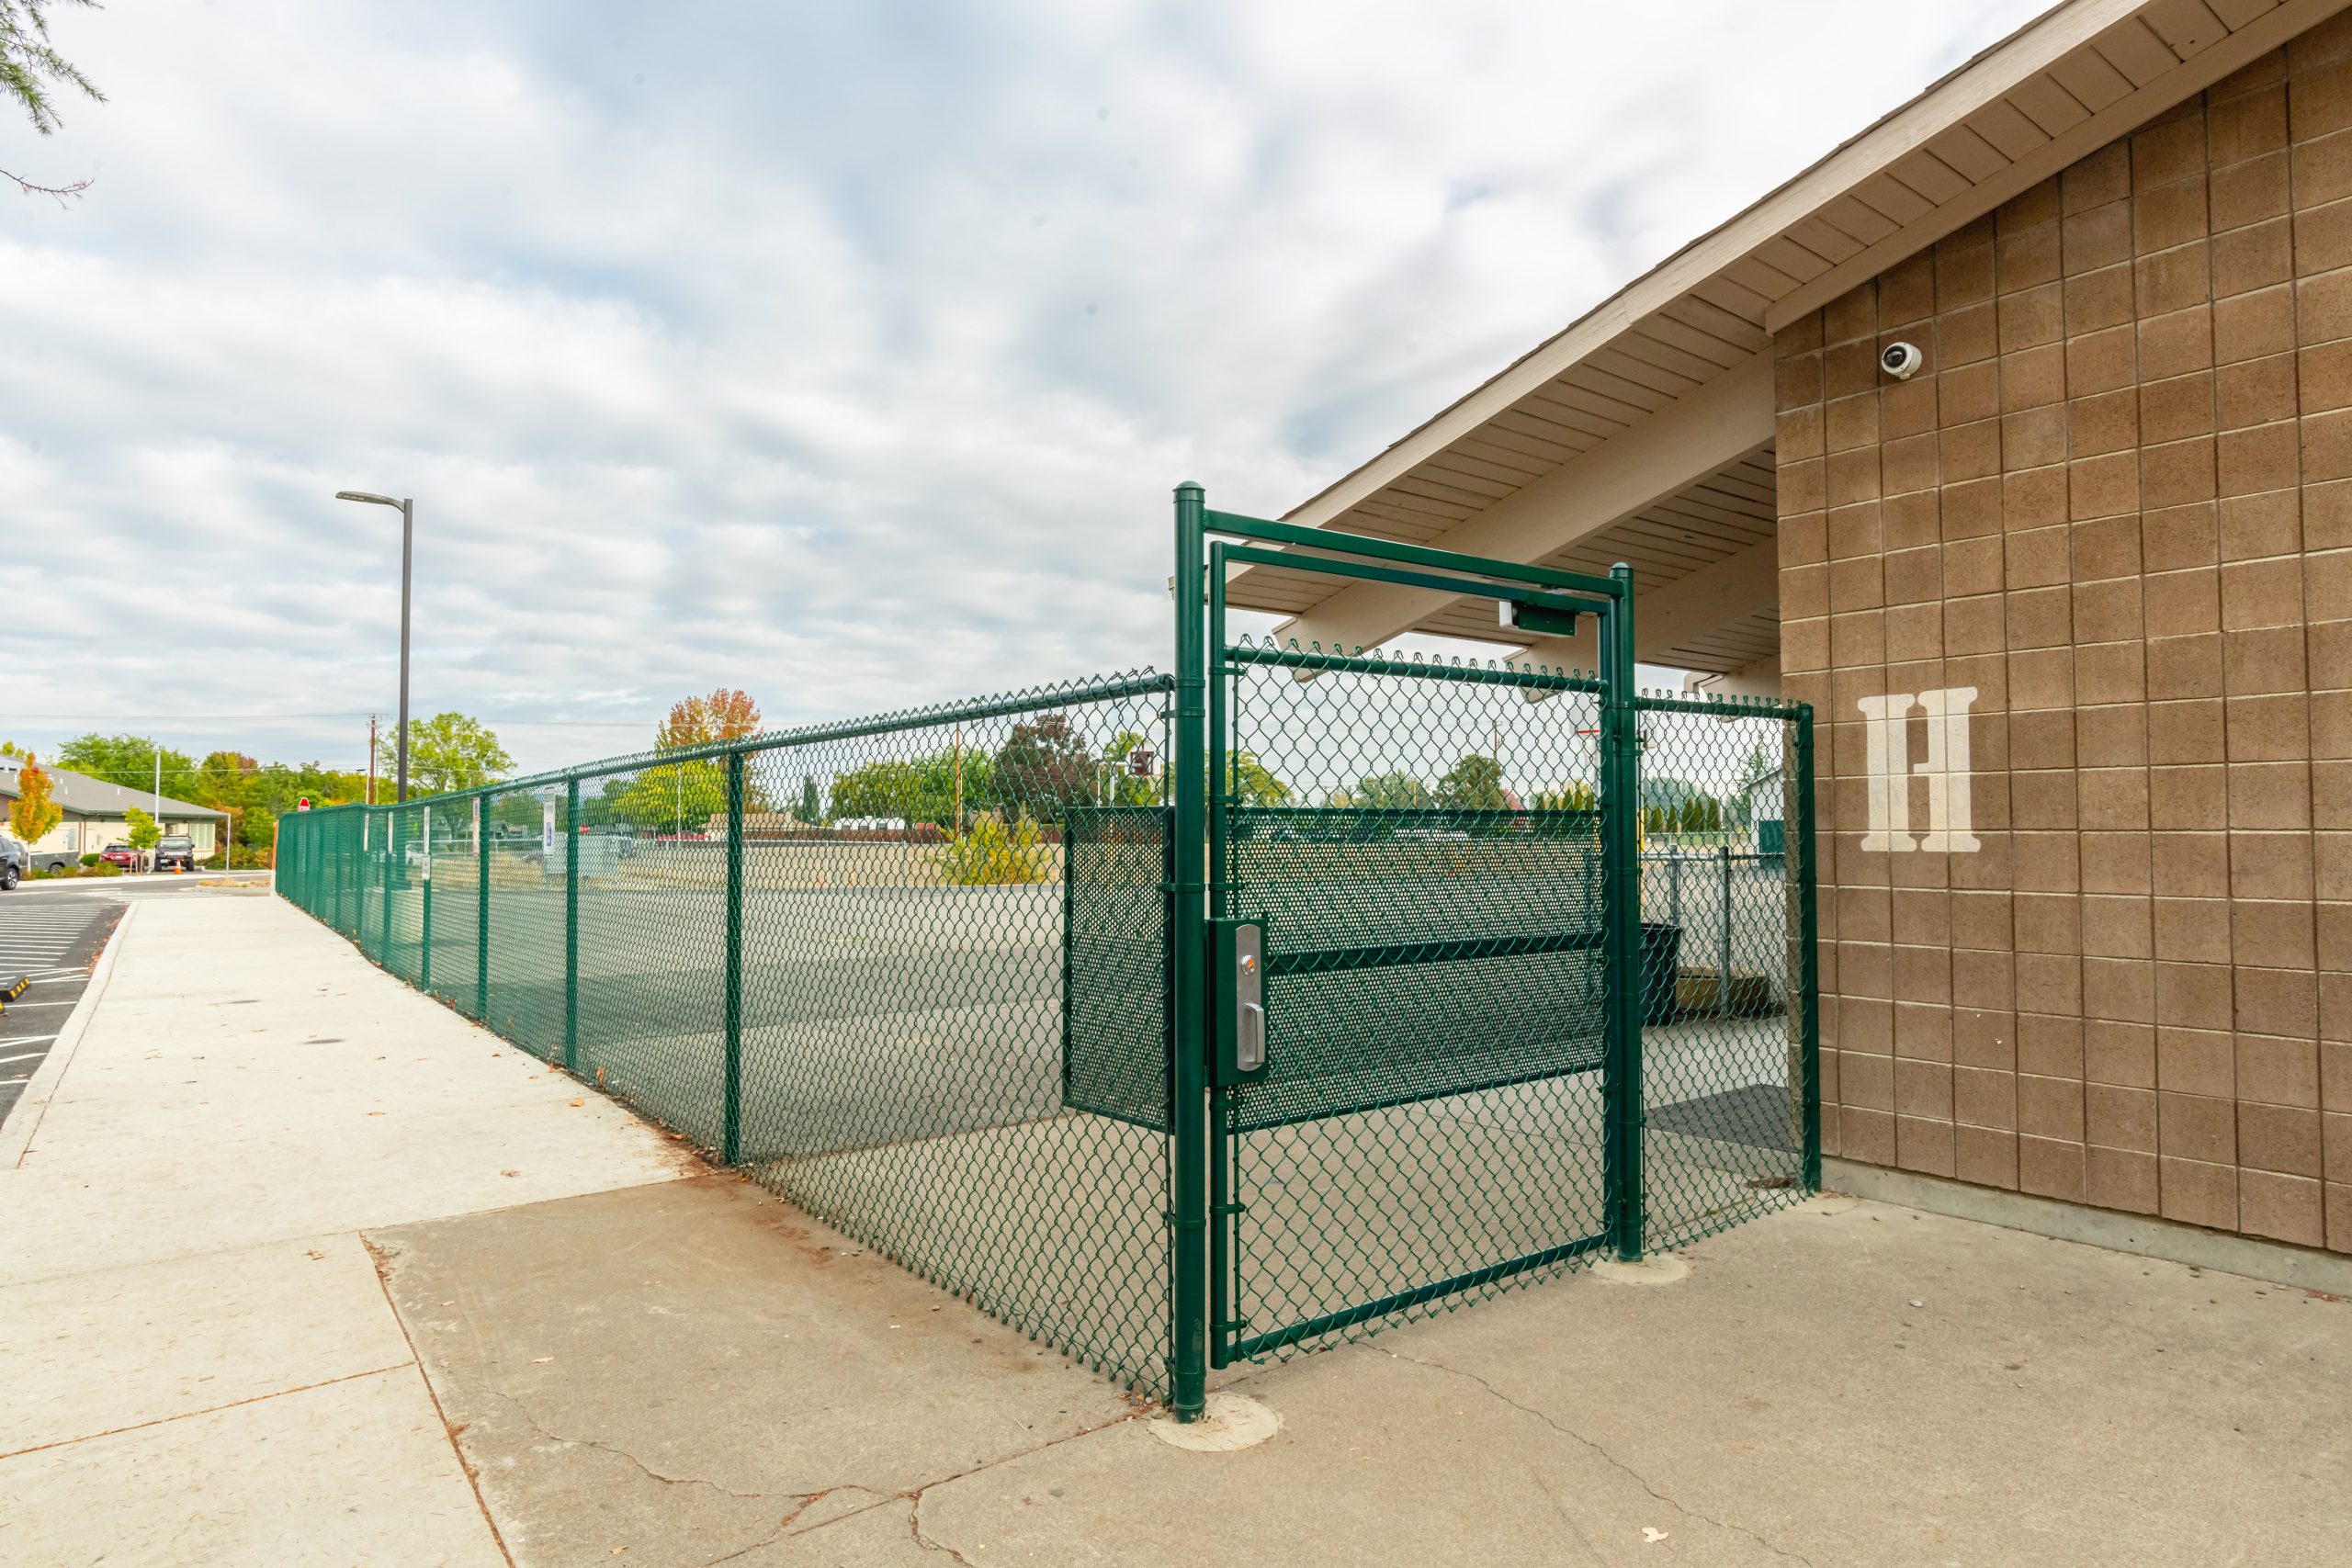 Newly installed security fencing at Scenic Middle School